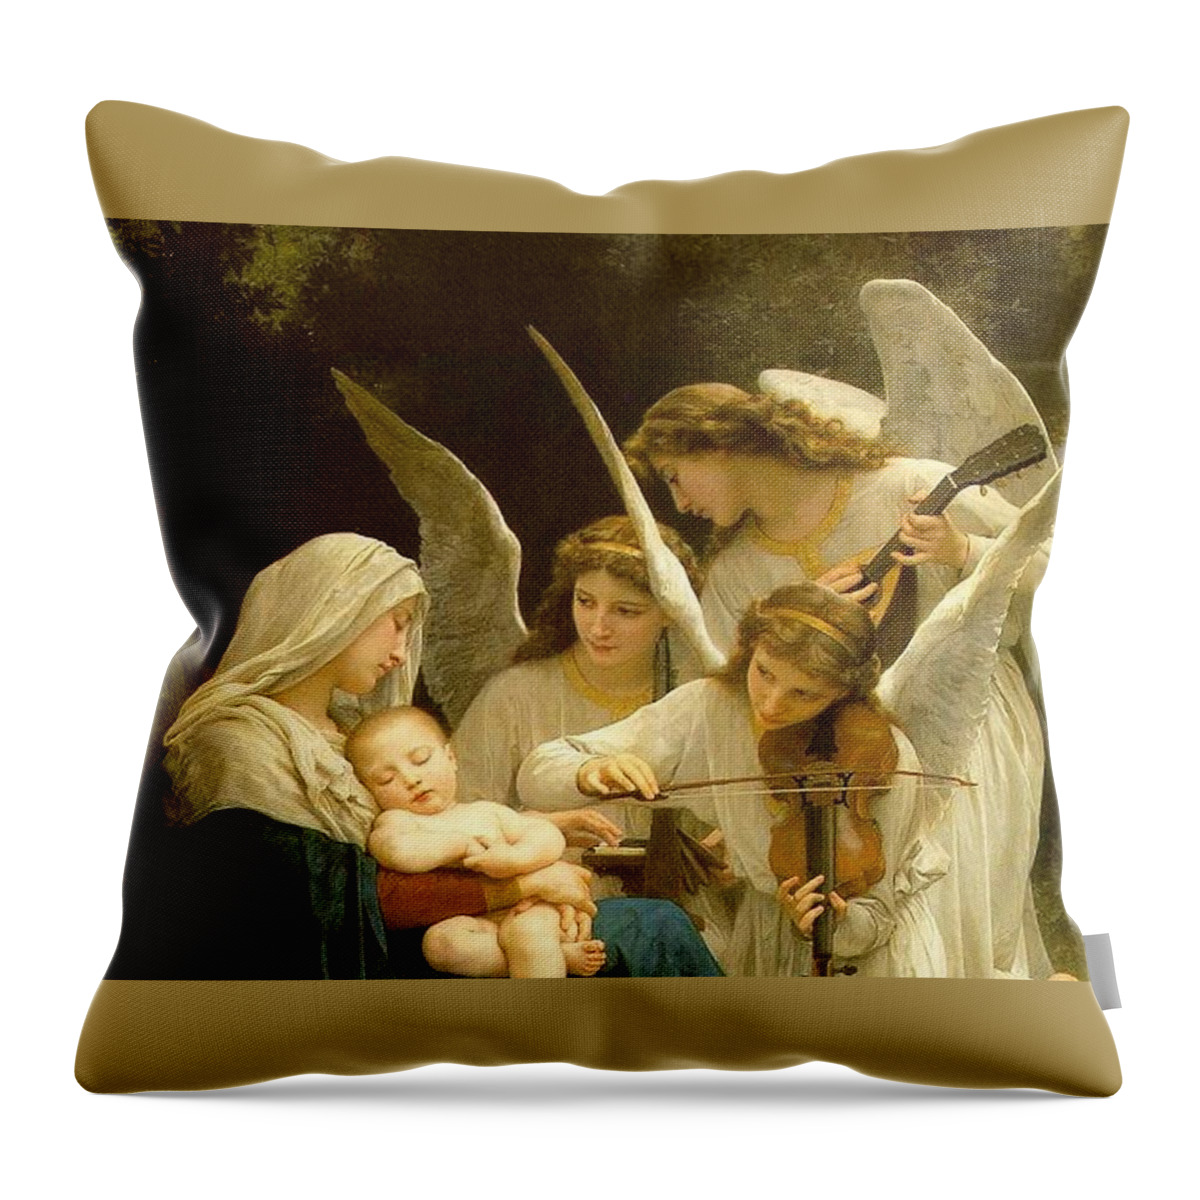 Nativity Throw Pillow featuring the painting Madonna and Child by William Bouguereau